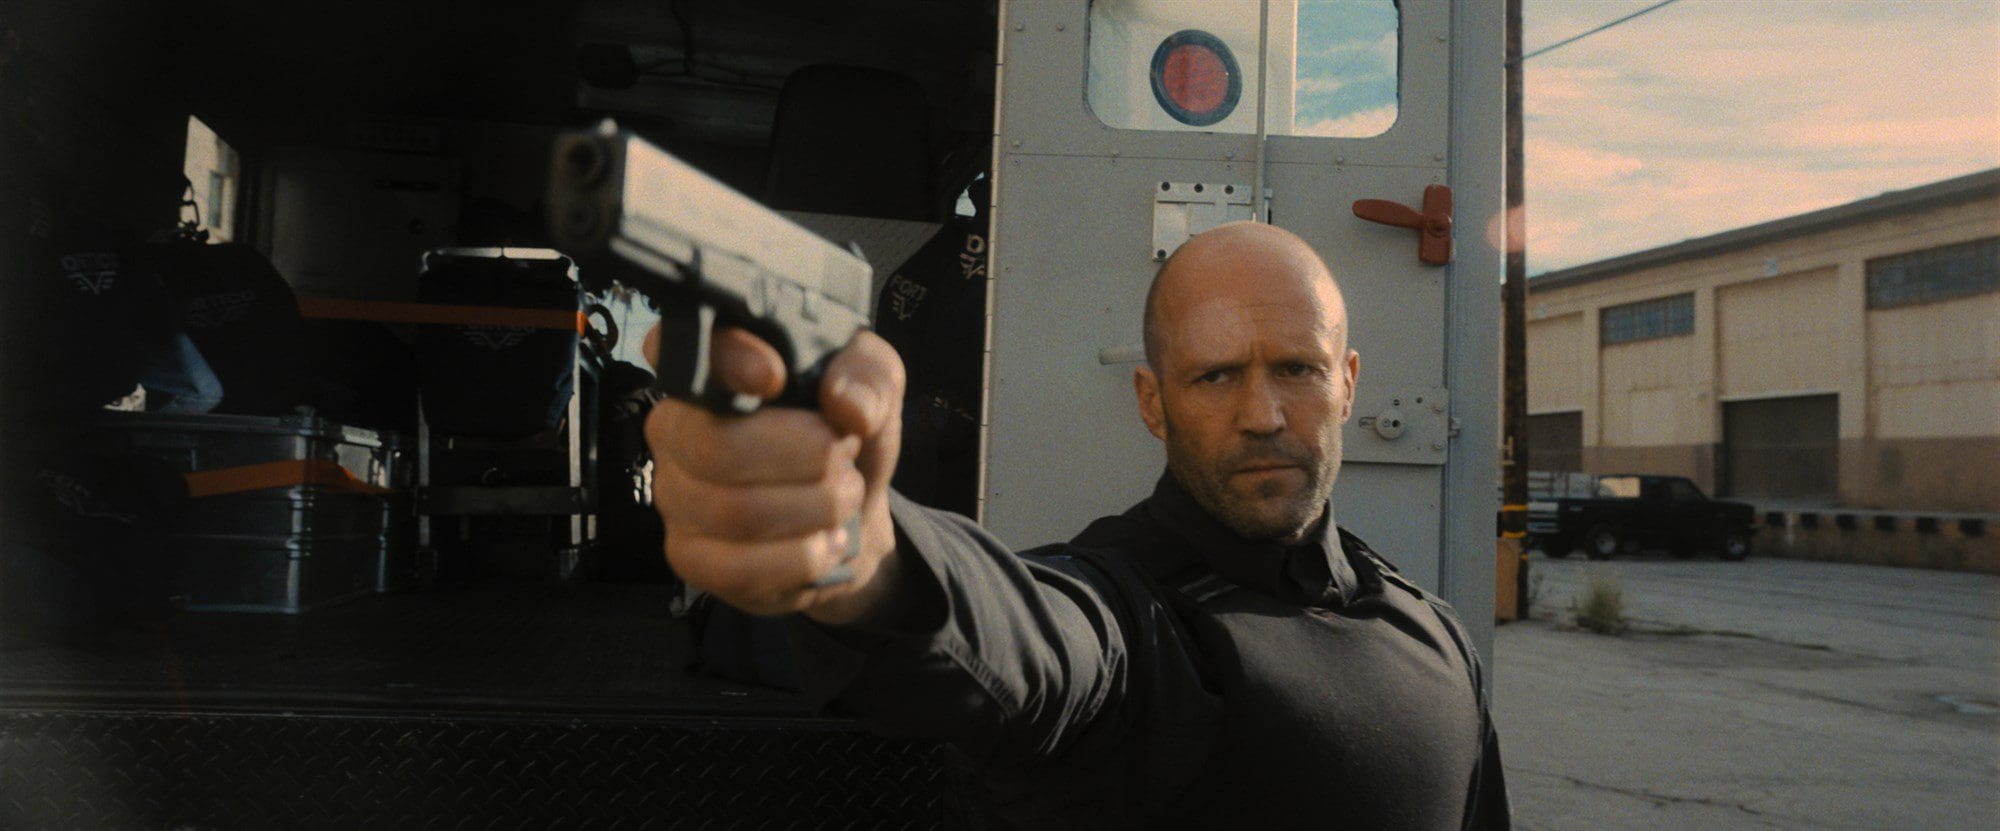 Jason Statham stars as H in director Guy Ritchie's WRATH OF MAN, A Metro Goldwyn Mayer Pictures film.